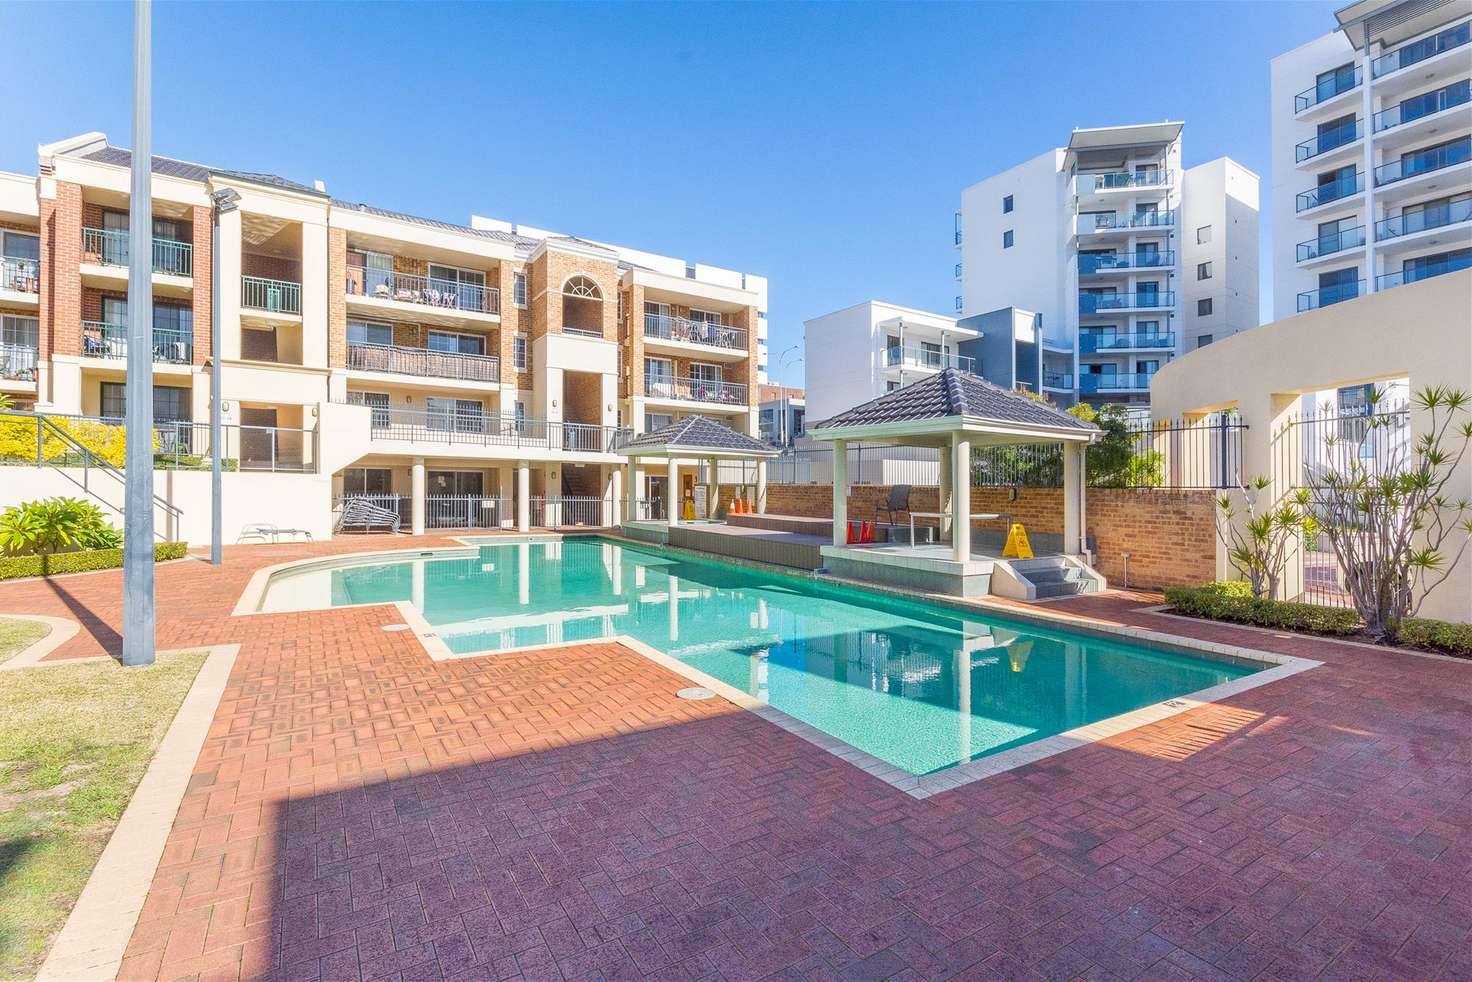 Main view of Homely apartment listing, 14/7 Delhi St, West Perth WA 6005